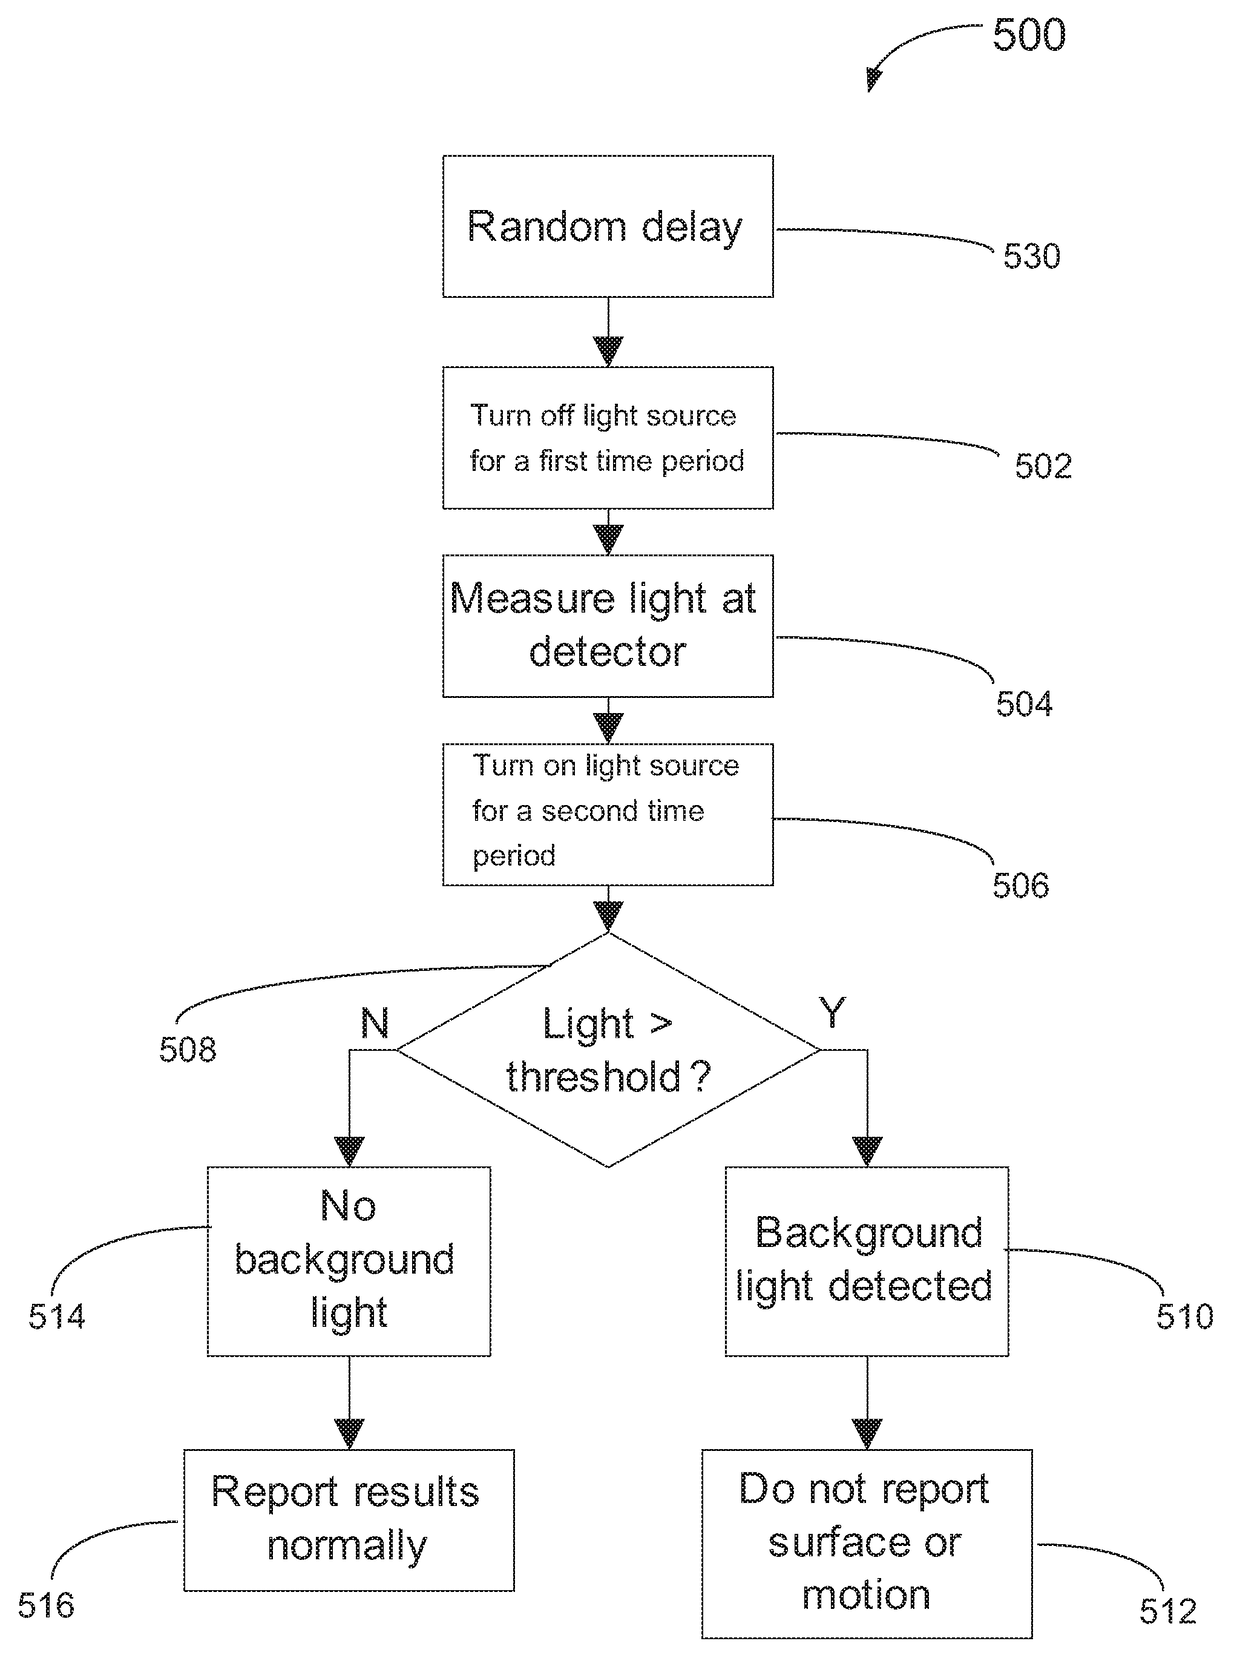 Optical navigation systems and methods for background light detection and avoiding false detection and auto-movement